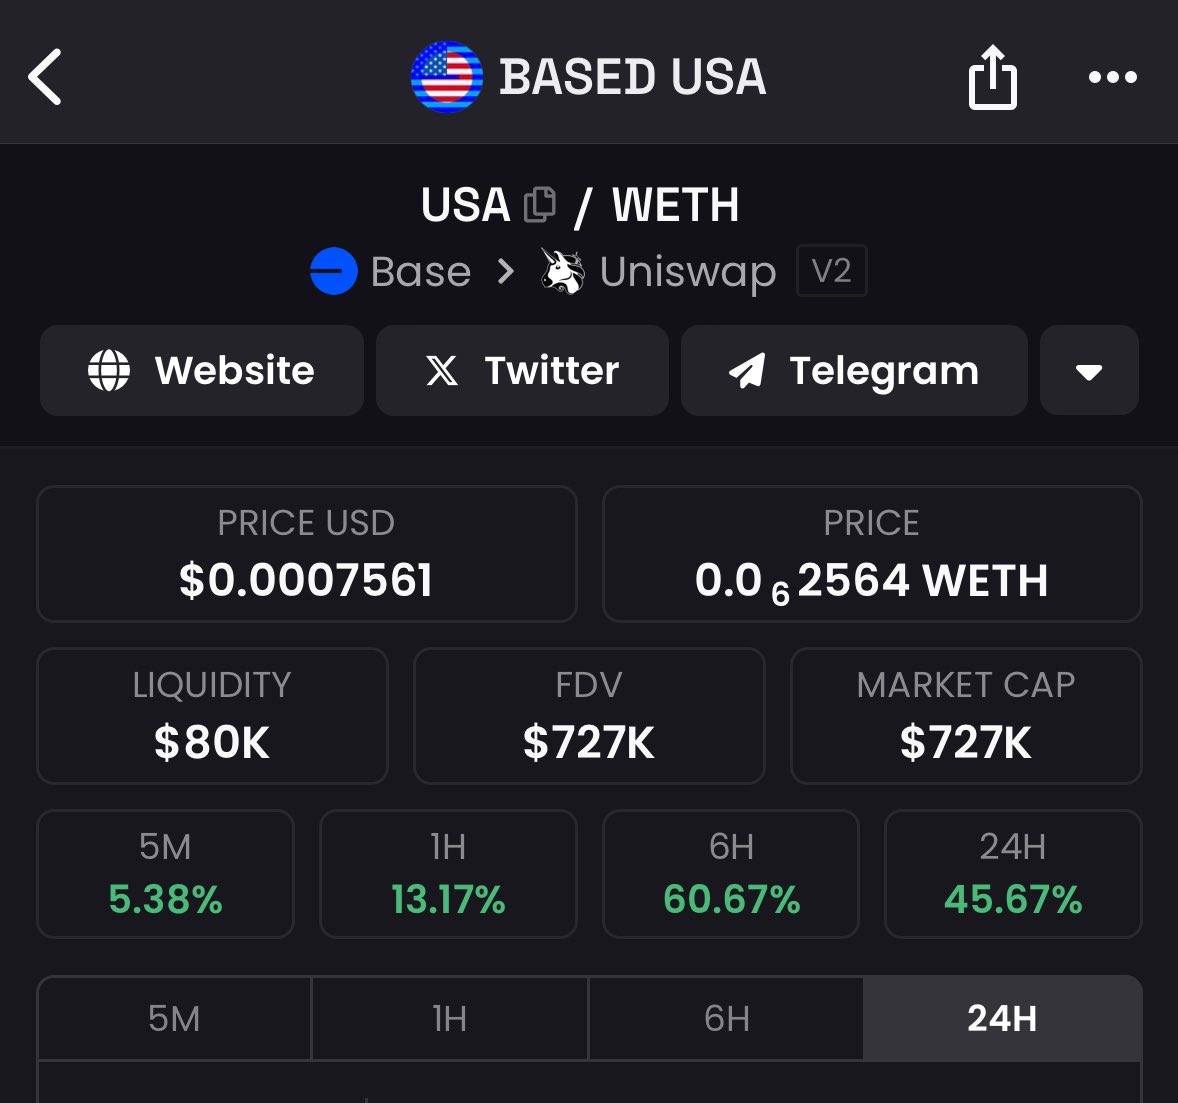 Bros $USA Is Creeping Up To ATH This Is Going To End Up Being Another 100x Call on Base Community Too Strong 💪 🇺🇸 Am I Still With Size? Of Course. R u?